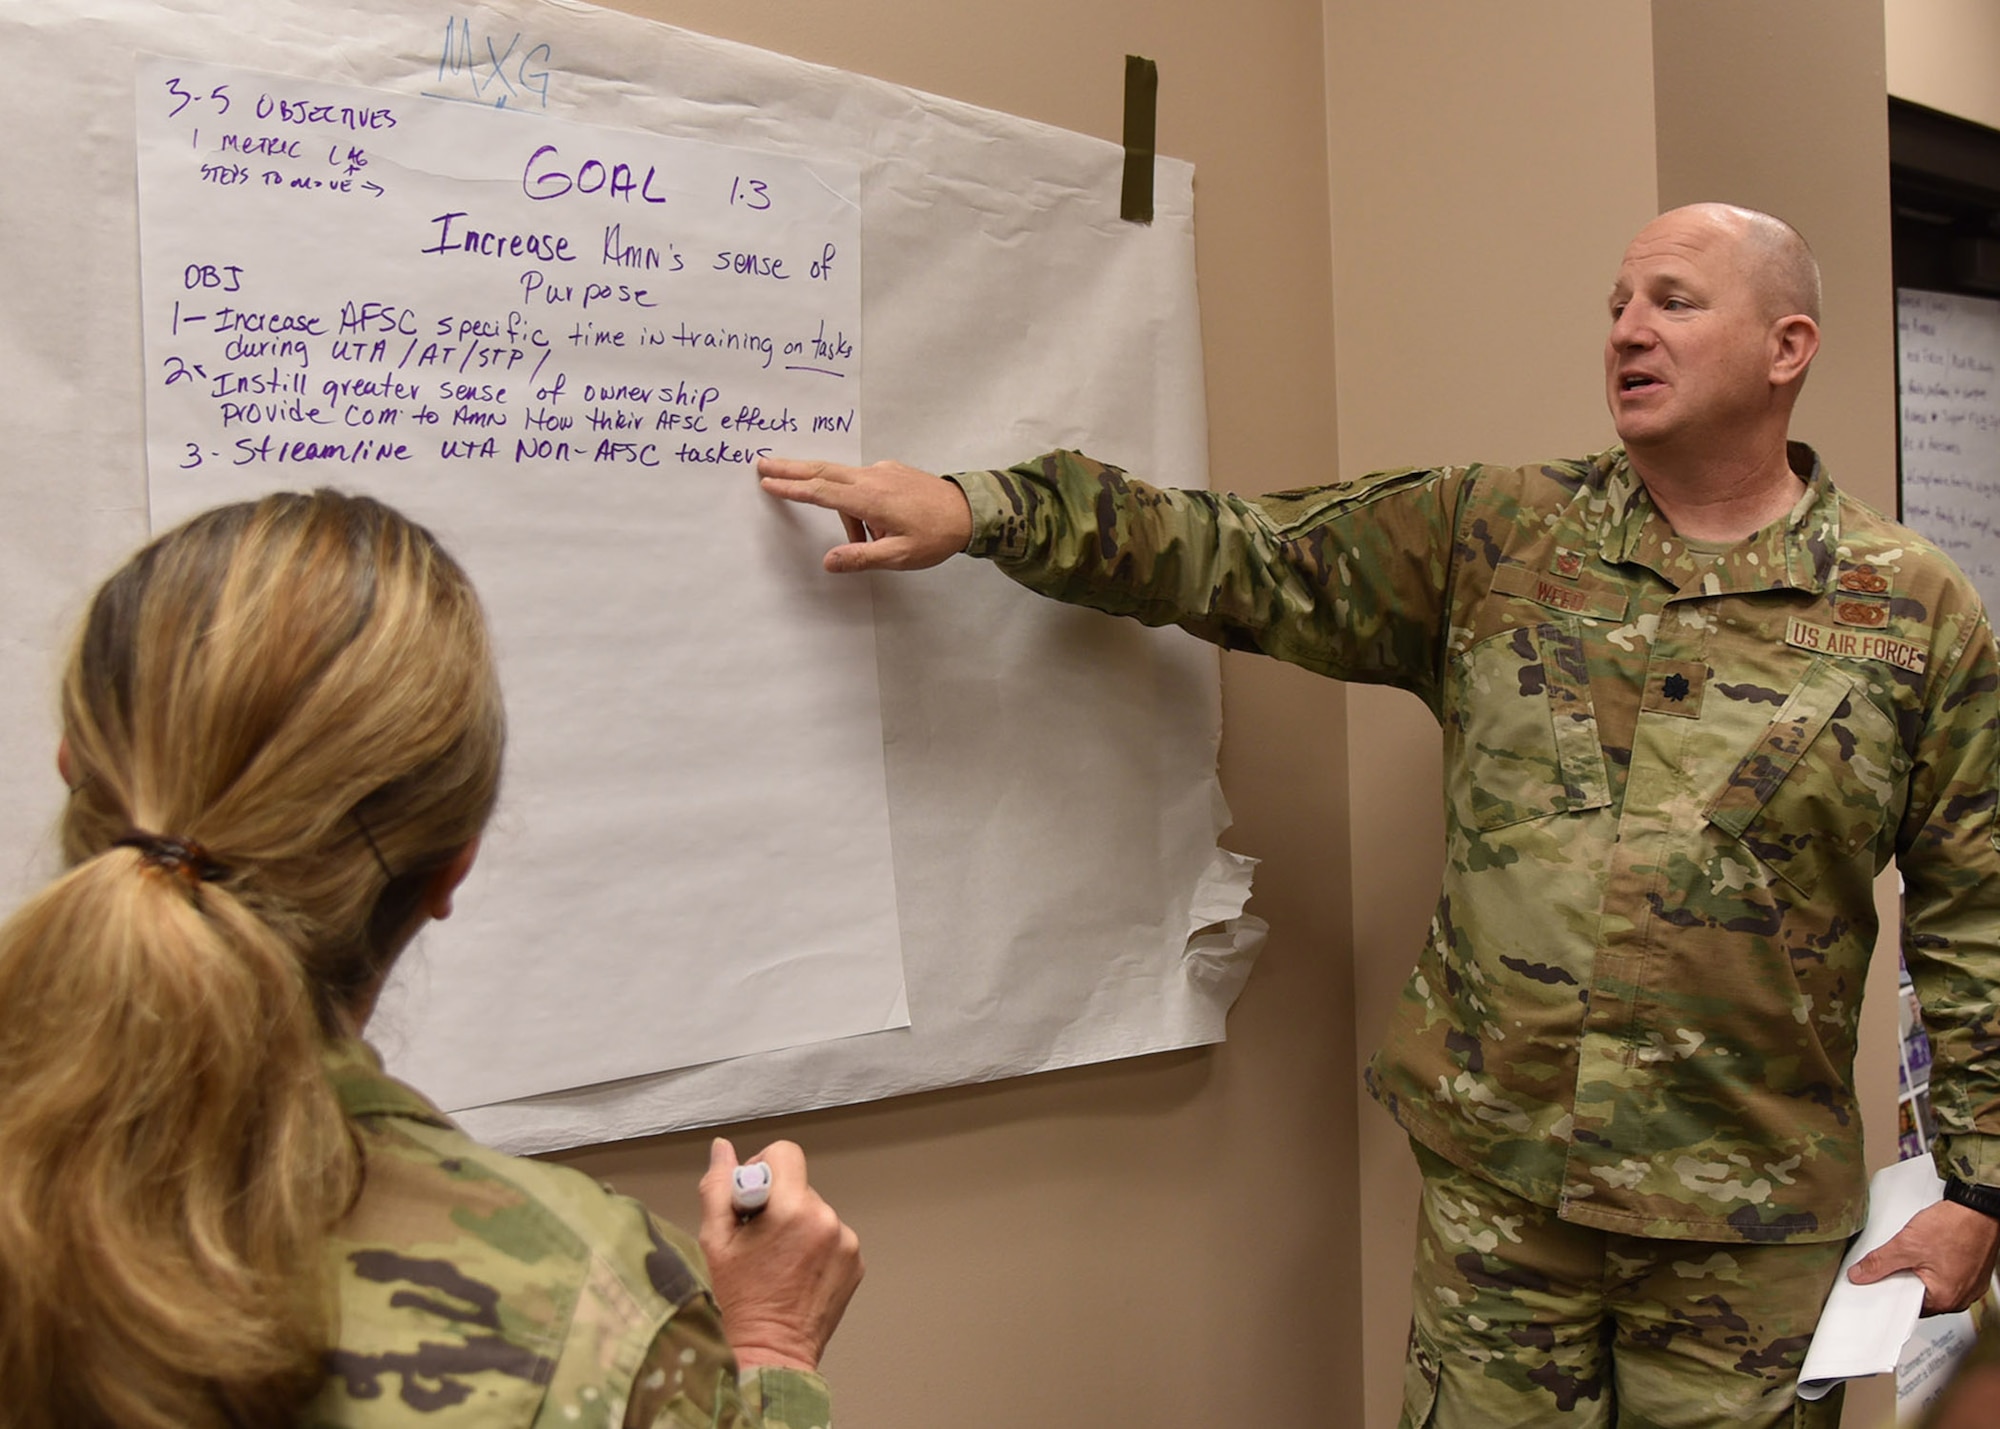 Lt. Col. Weed points to a paper on the wall as SMSgt Trippe looks on from the foreground